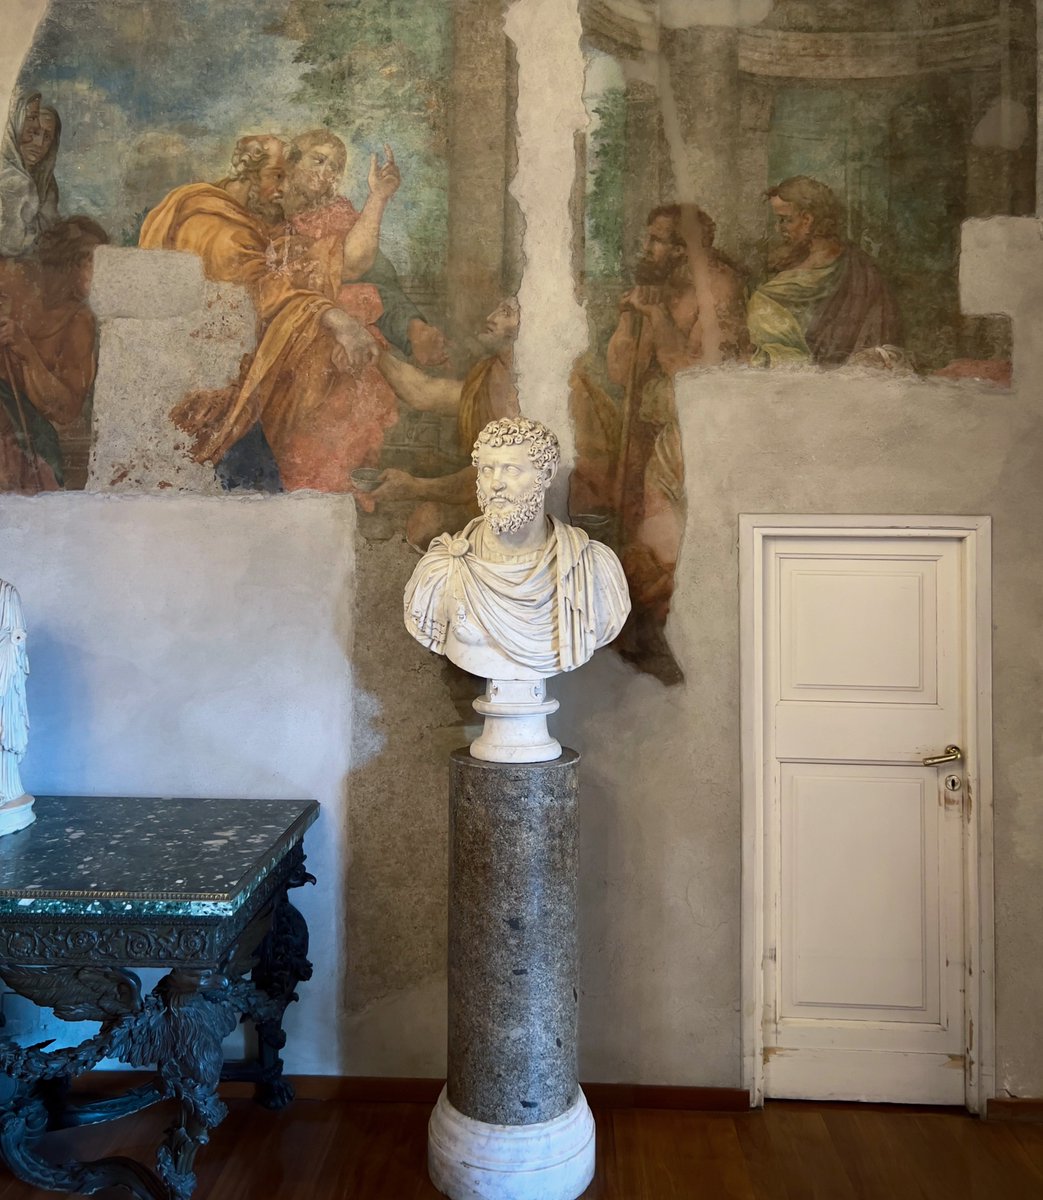 No big deal. Just an ancient portrait of a Roman emperor on a spoliated marble column, against a Renaissance (?) fresco. And a very tiny door that probably leads to John Malkovich's mind (it was locked).

Capitoline Museums, 2022. #Rome #SpoliaSunday